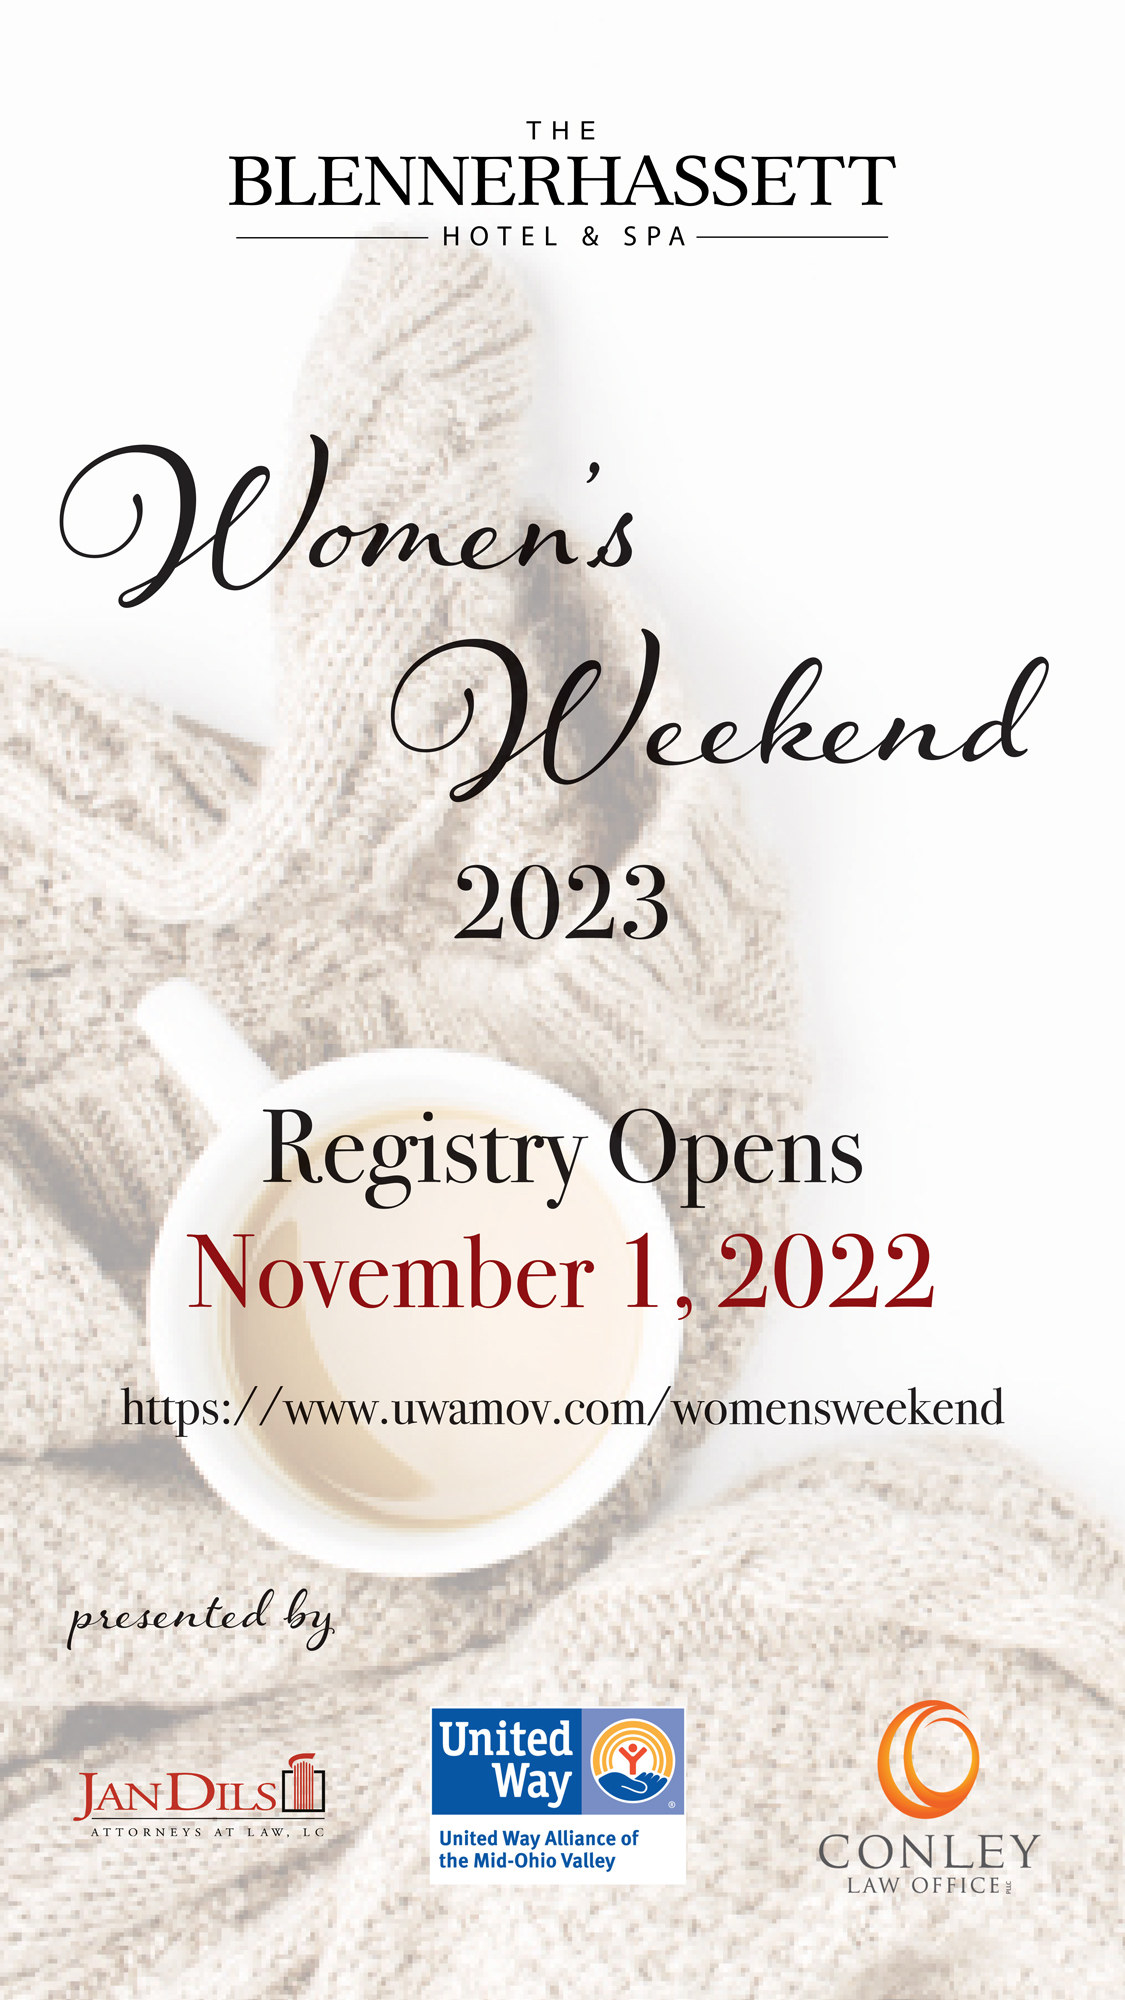 Womens Weekend 2023 Registration Opens Nov 1. Sponsored by Jan Dils Attorneys at Law, United Way Alliance of the Mid-Ohio Valley and Conley Law Offices